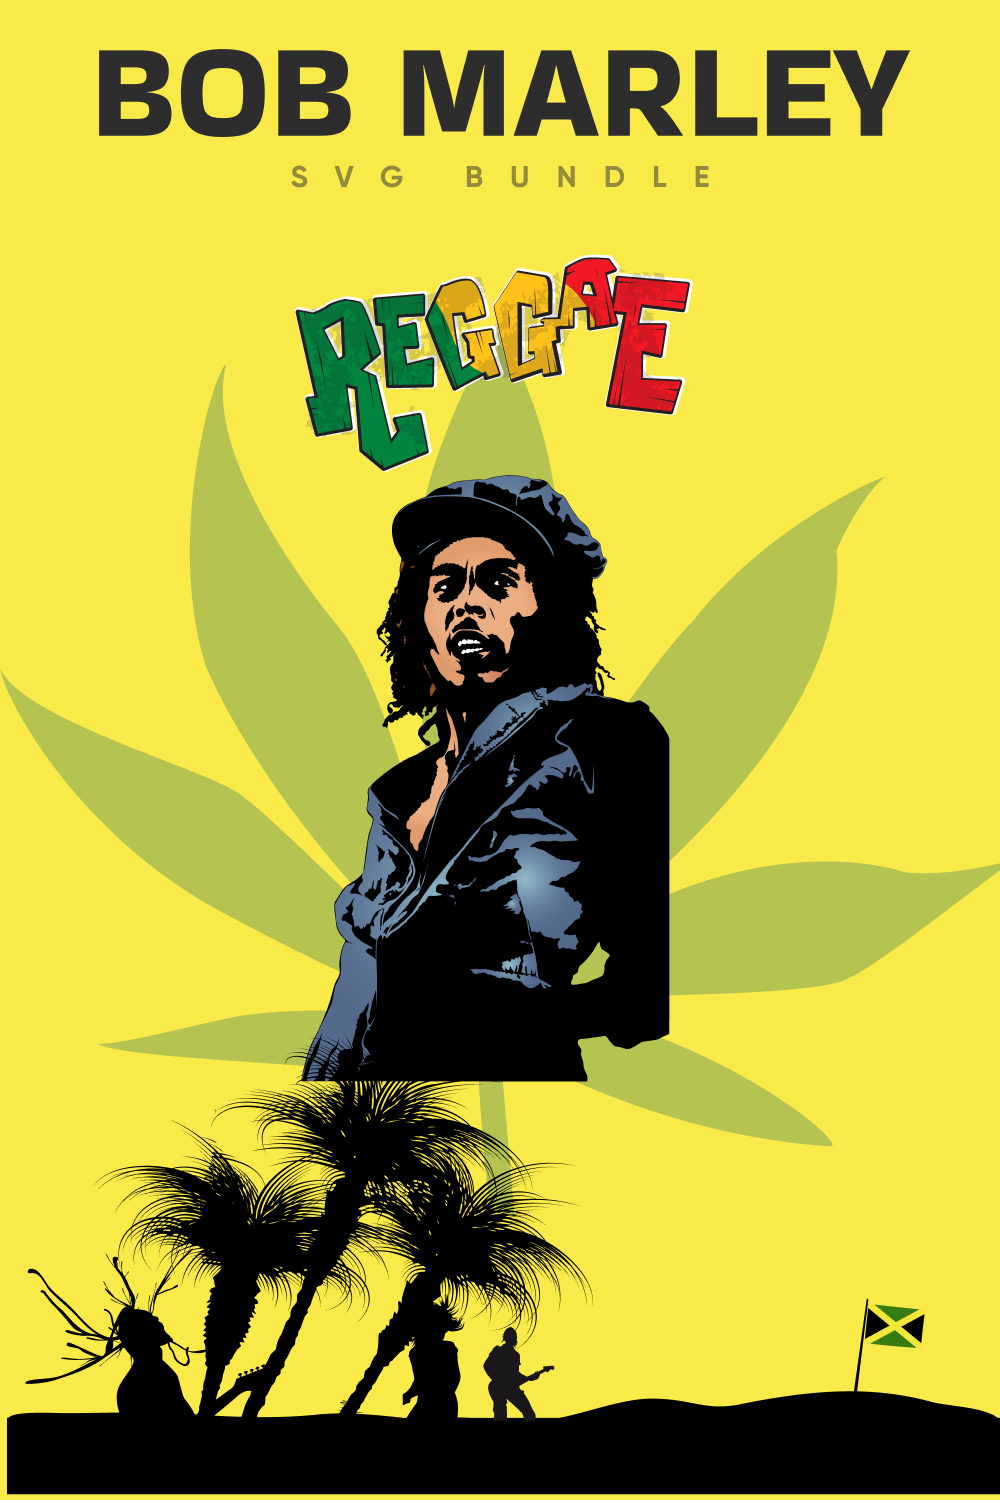 Yellow background with light green leaf and Bob Marley.